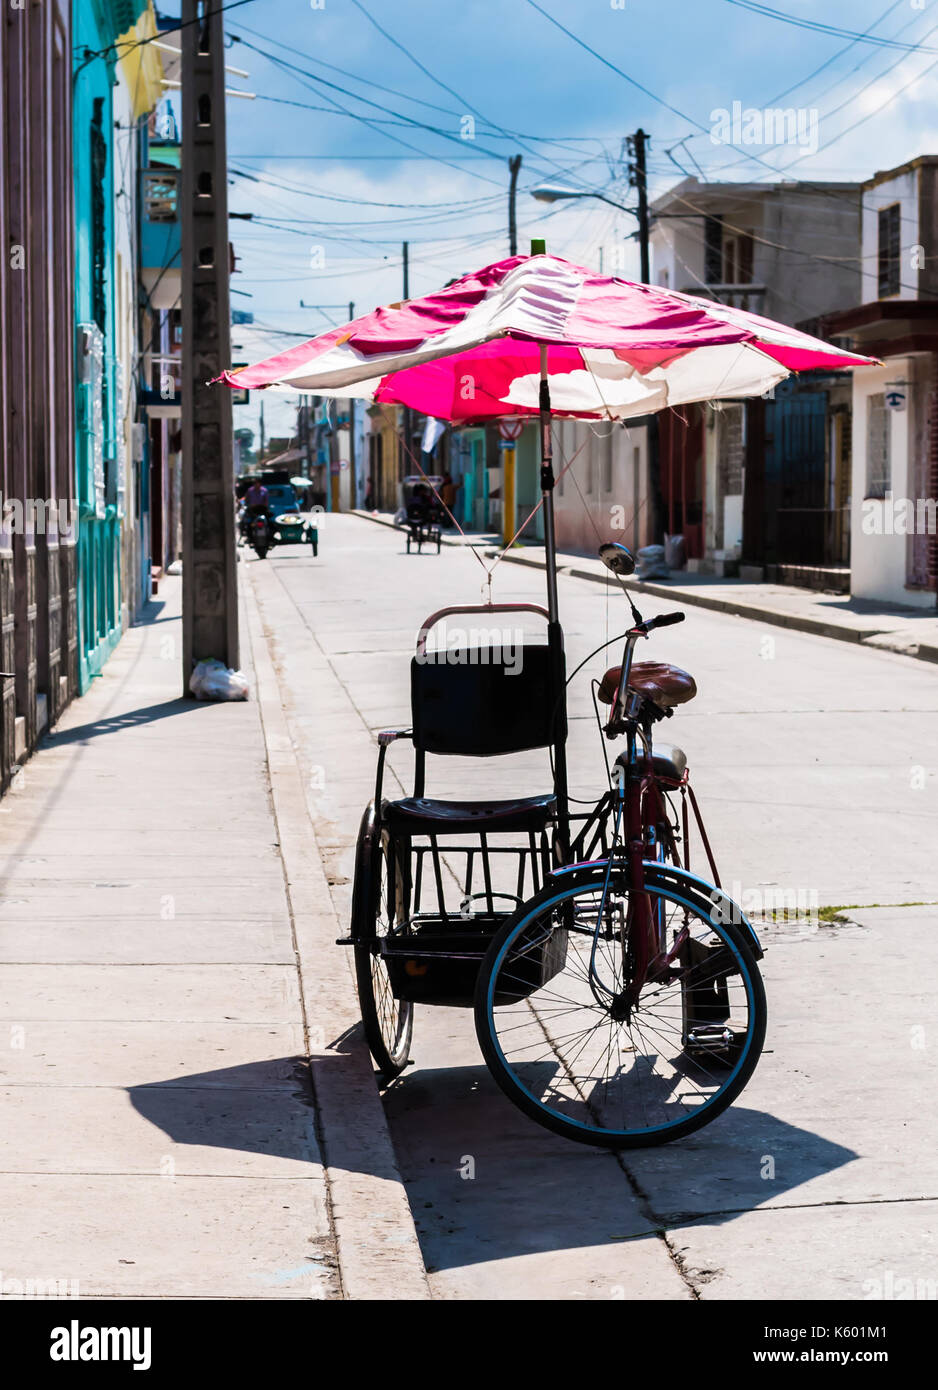 Bicycle taxi, pedicab bike parked on the side of a street. Colorful umbrella attached to the cart to provide shade for riders. Stock Photo